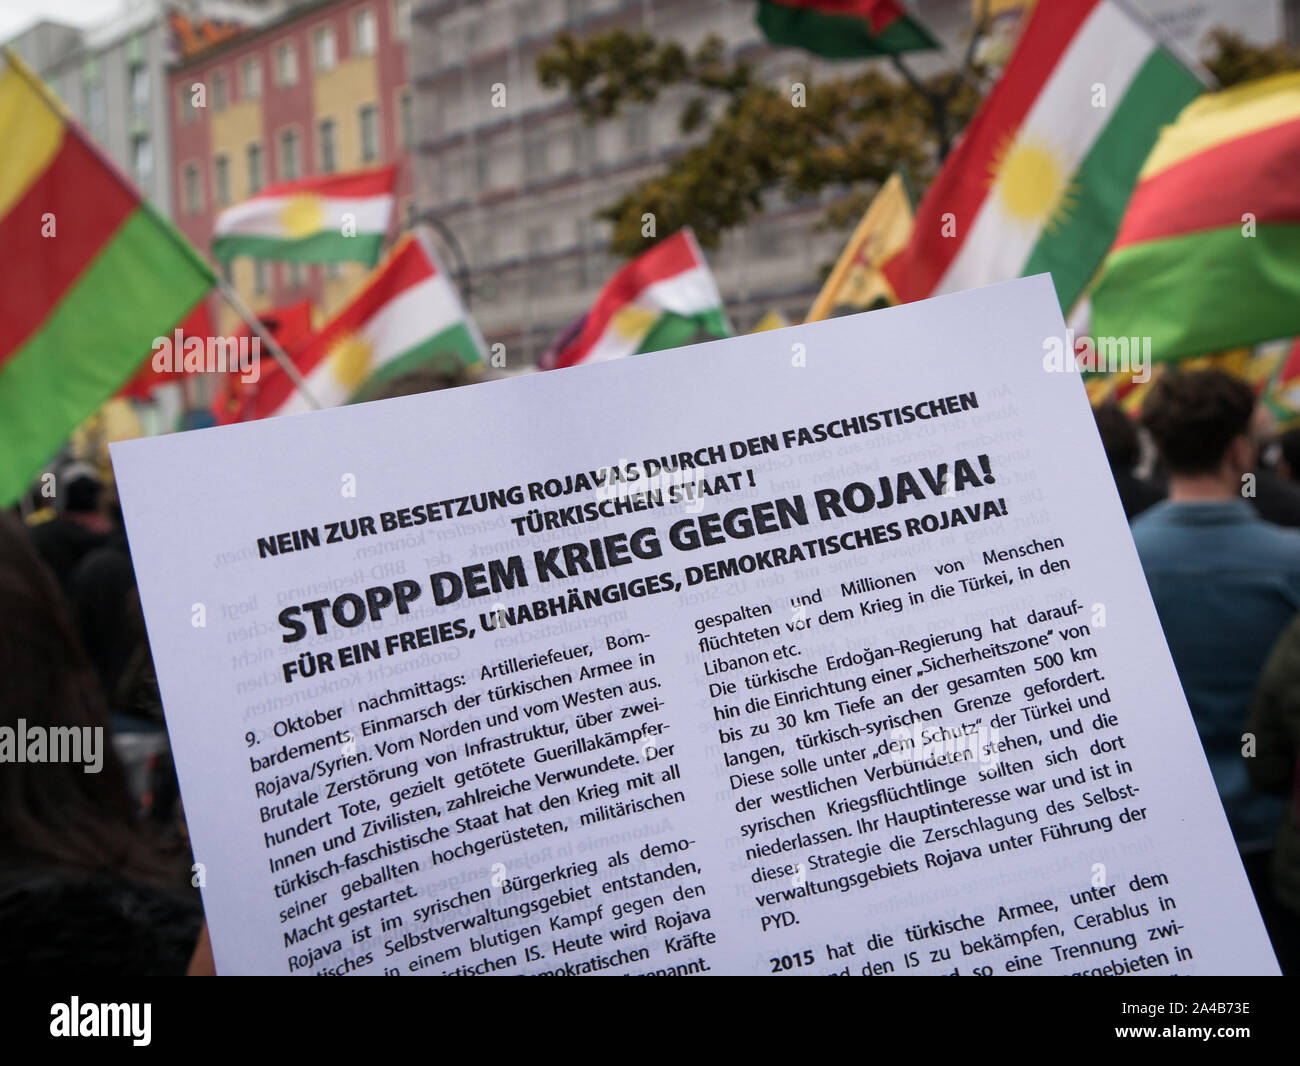 Demostration and protest against Turkish offensive in Syria against the Kurds, flyer calling for end of war in rojava, ypg and kurdish flags in back Stock Photo